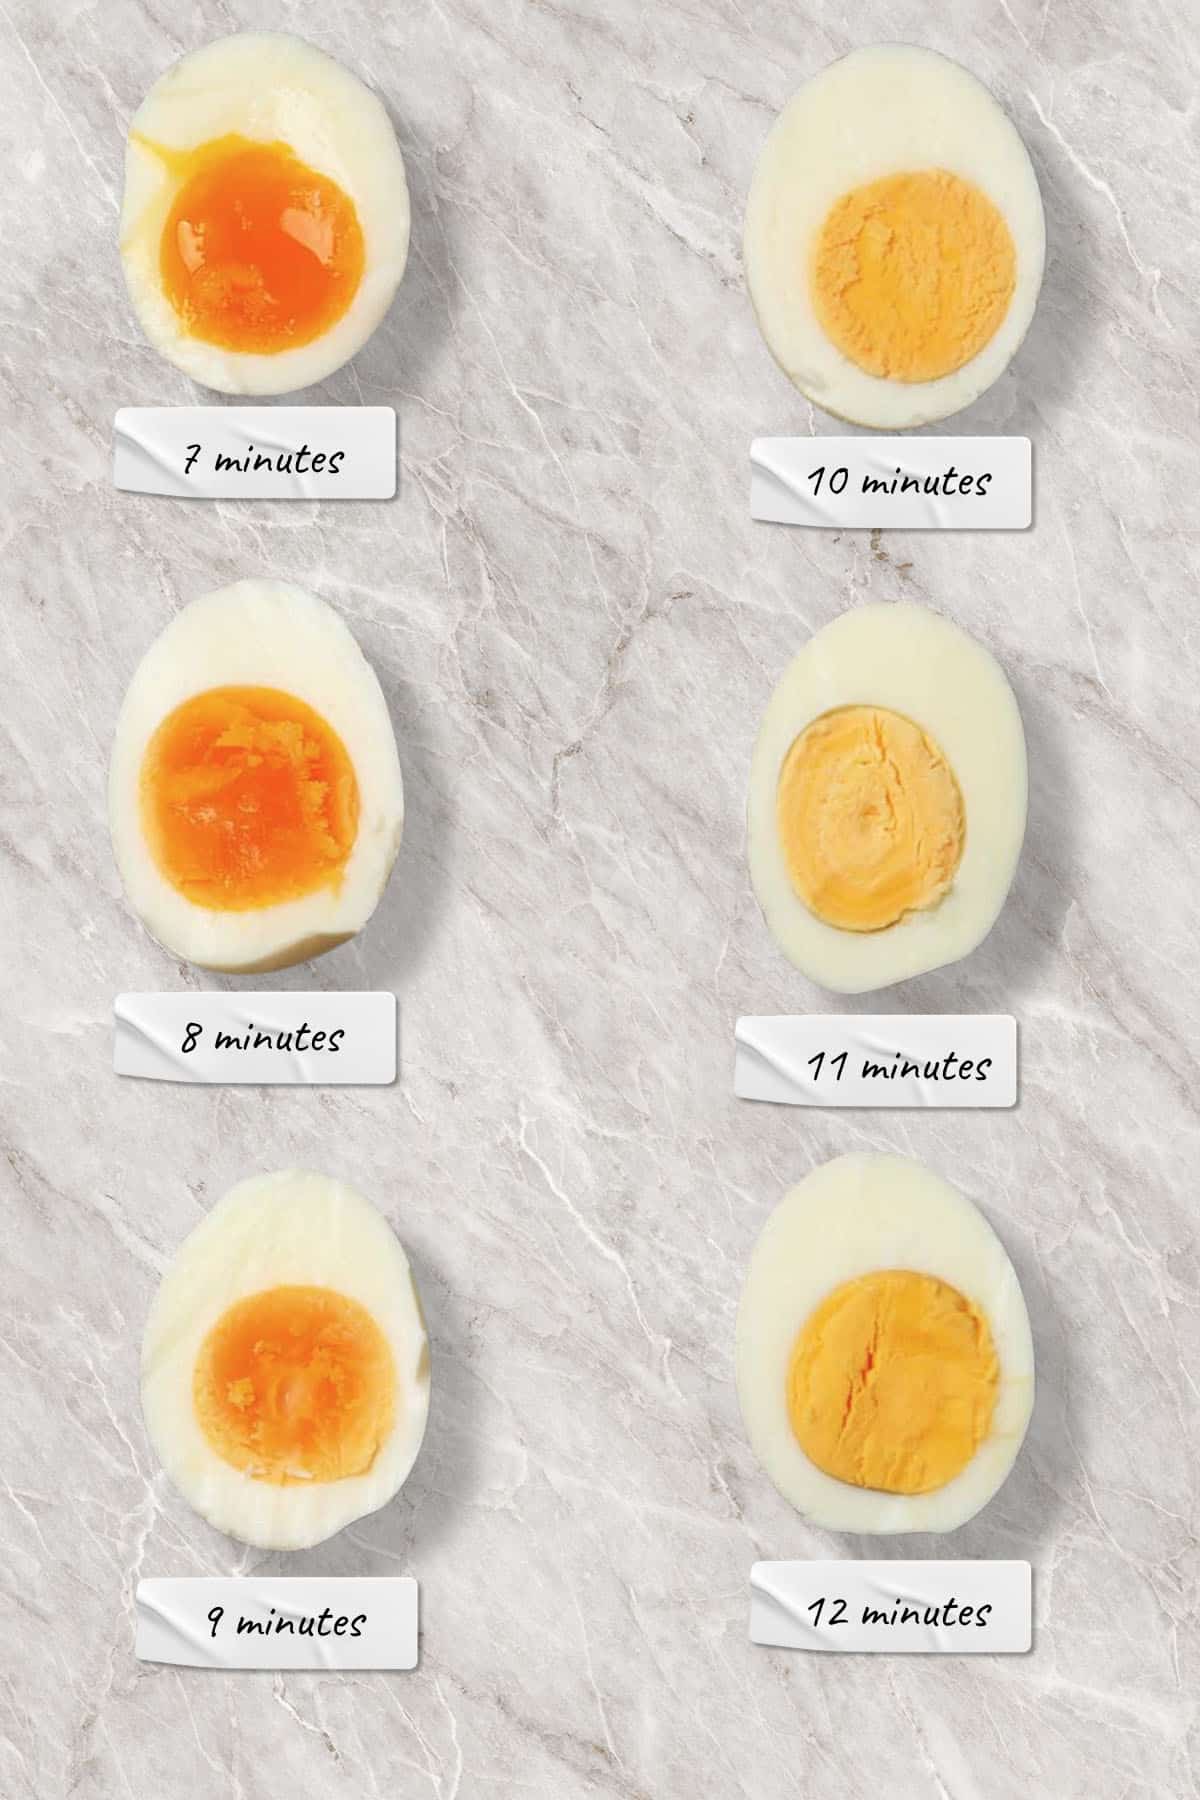 Boiled egg guide for Mayak Eggs. Learn how to achieve soft-boiled, hard-boiled perfection.